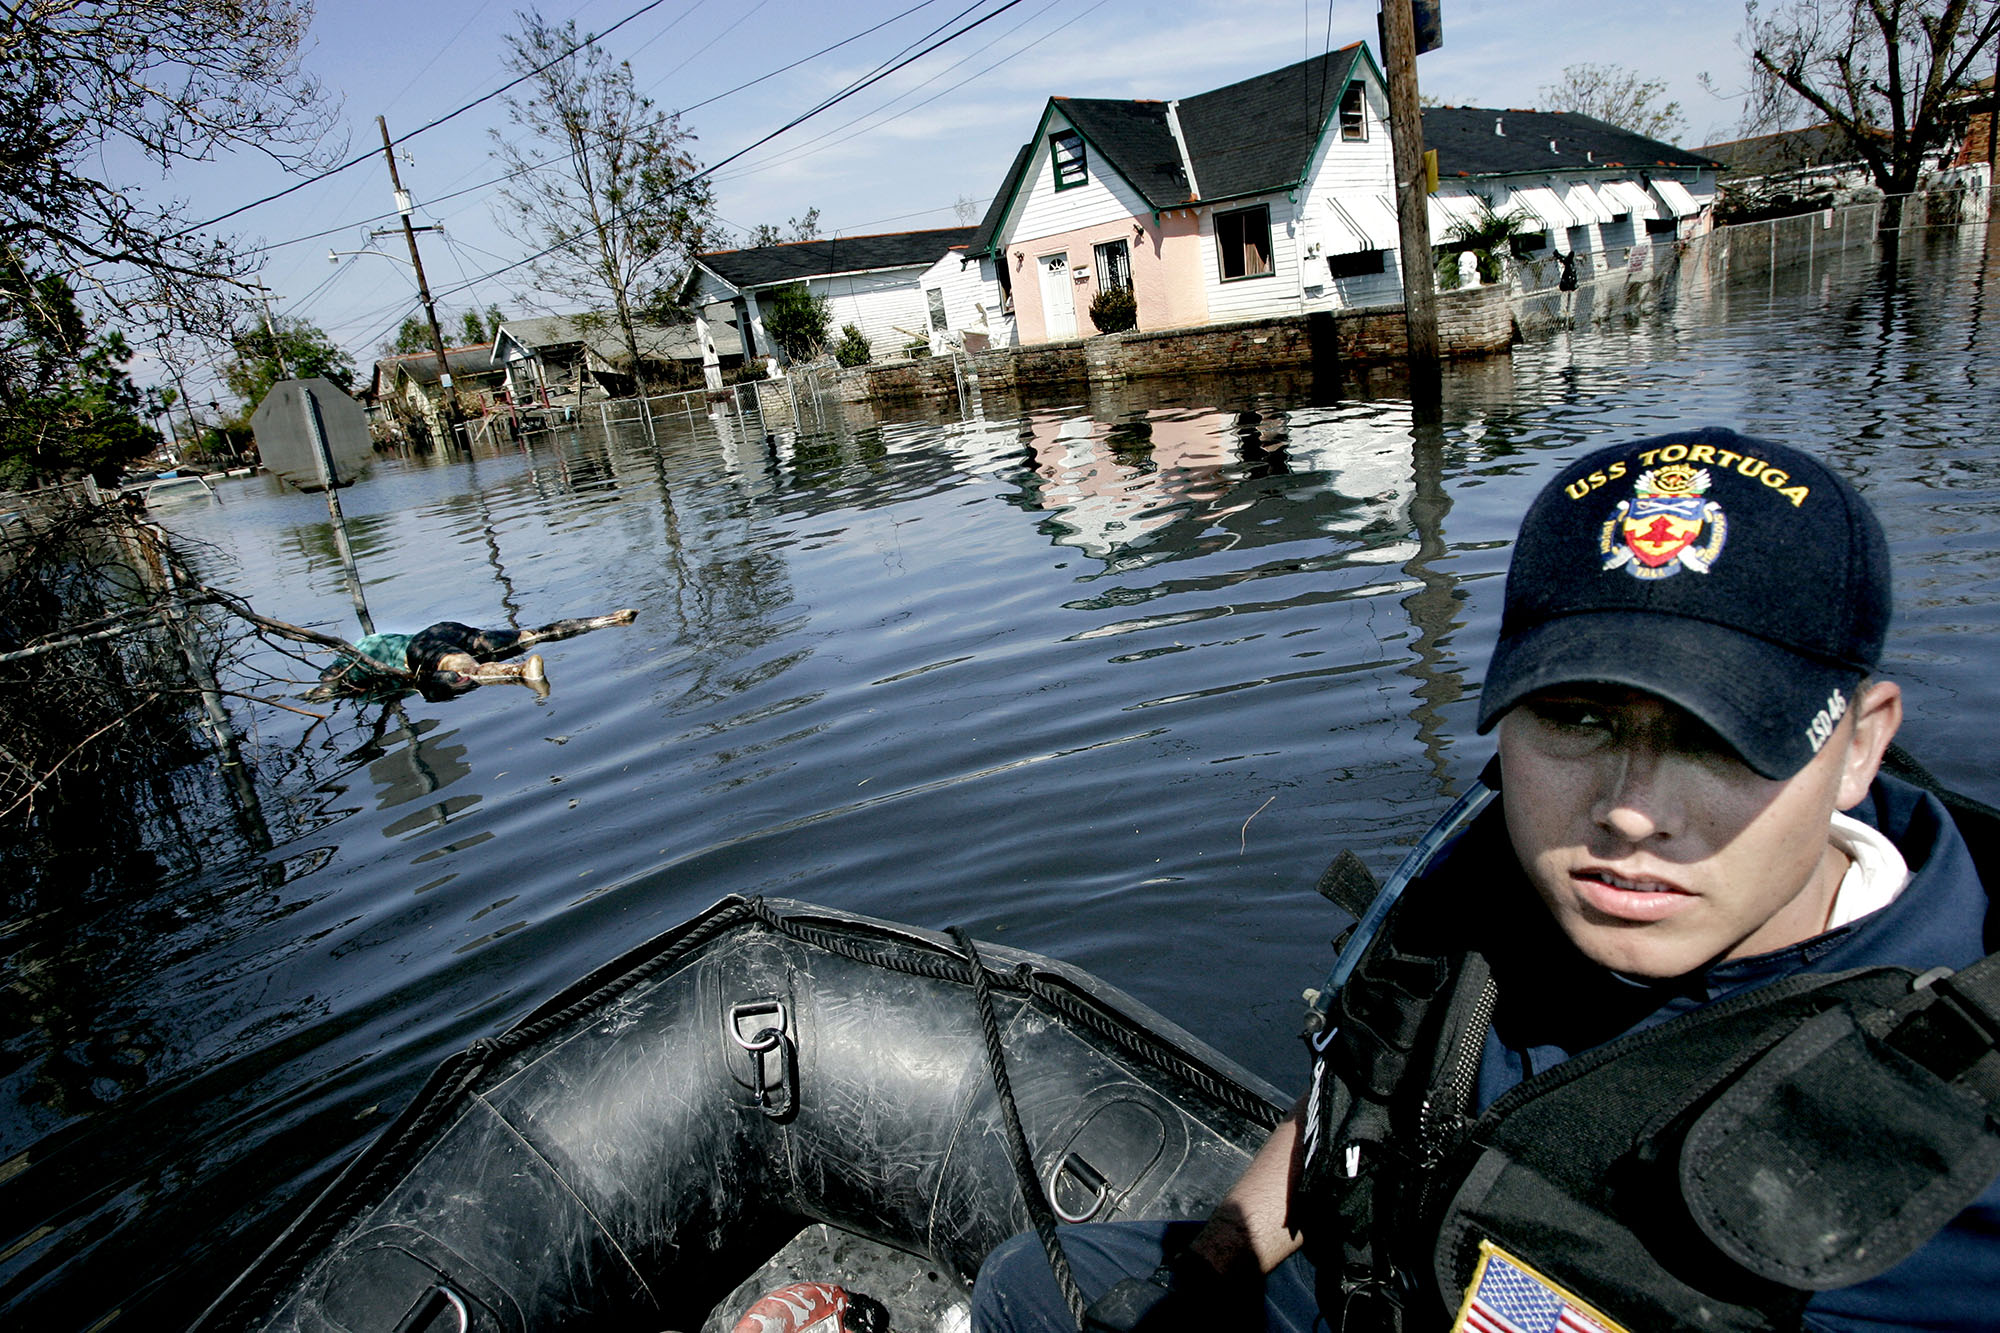 Lower Ninth Ward was one of the hardest hit neighborhoods with over 1,000 deaths.